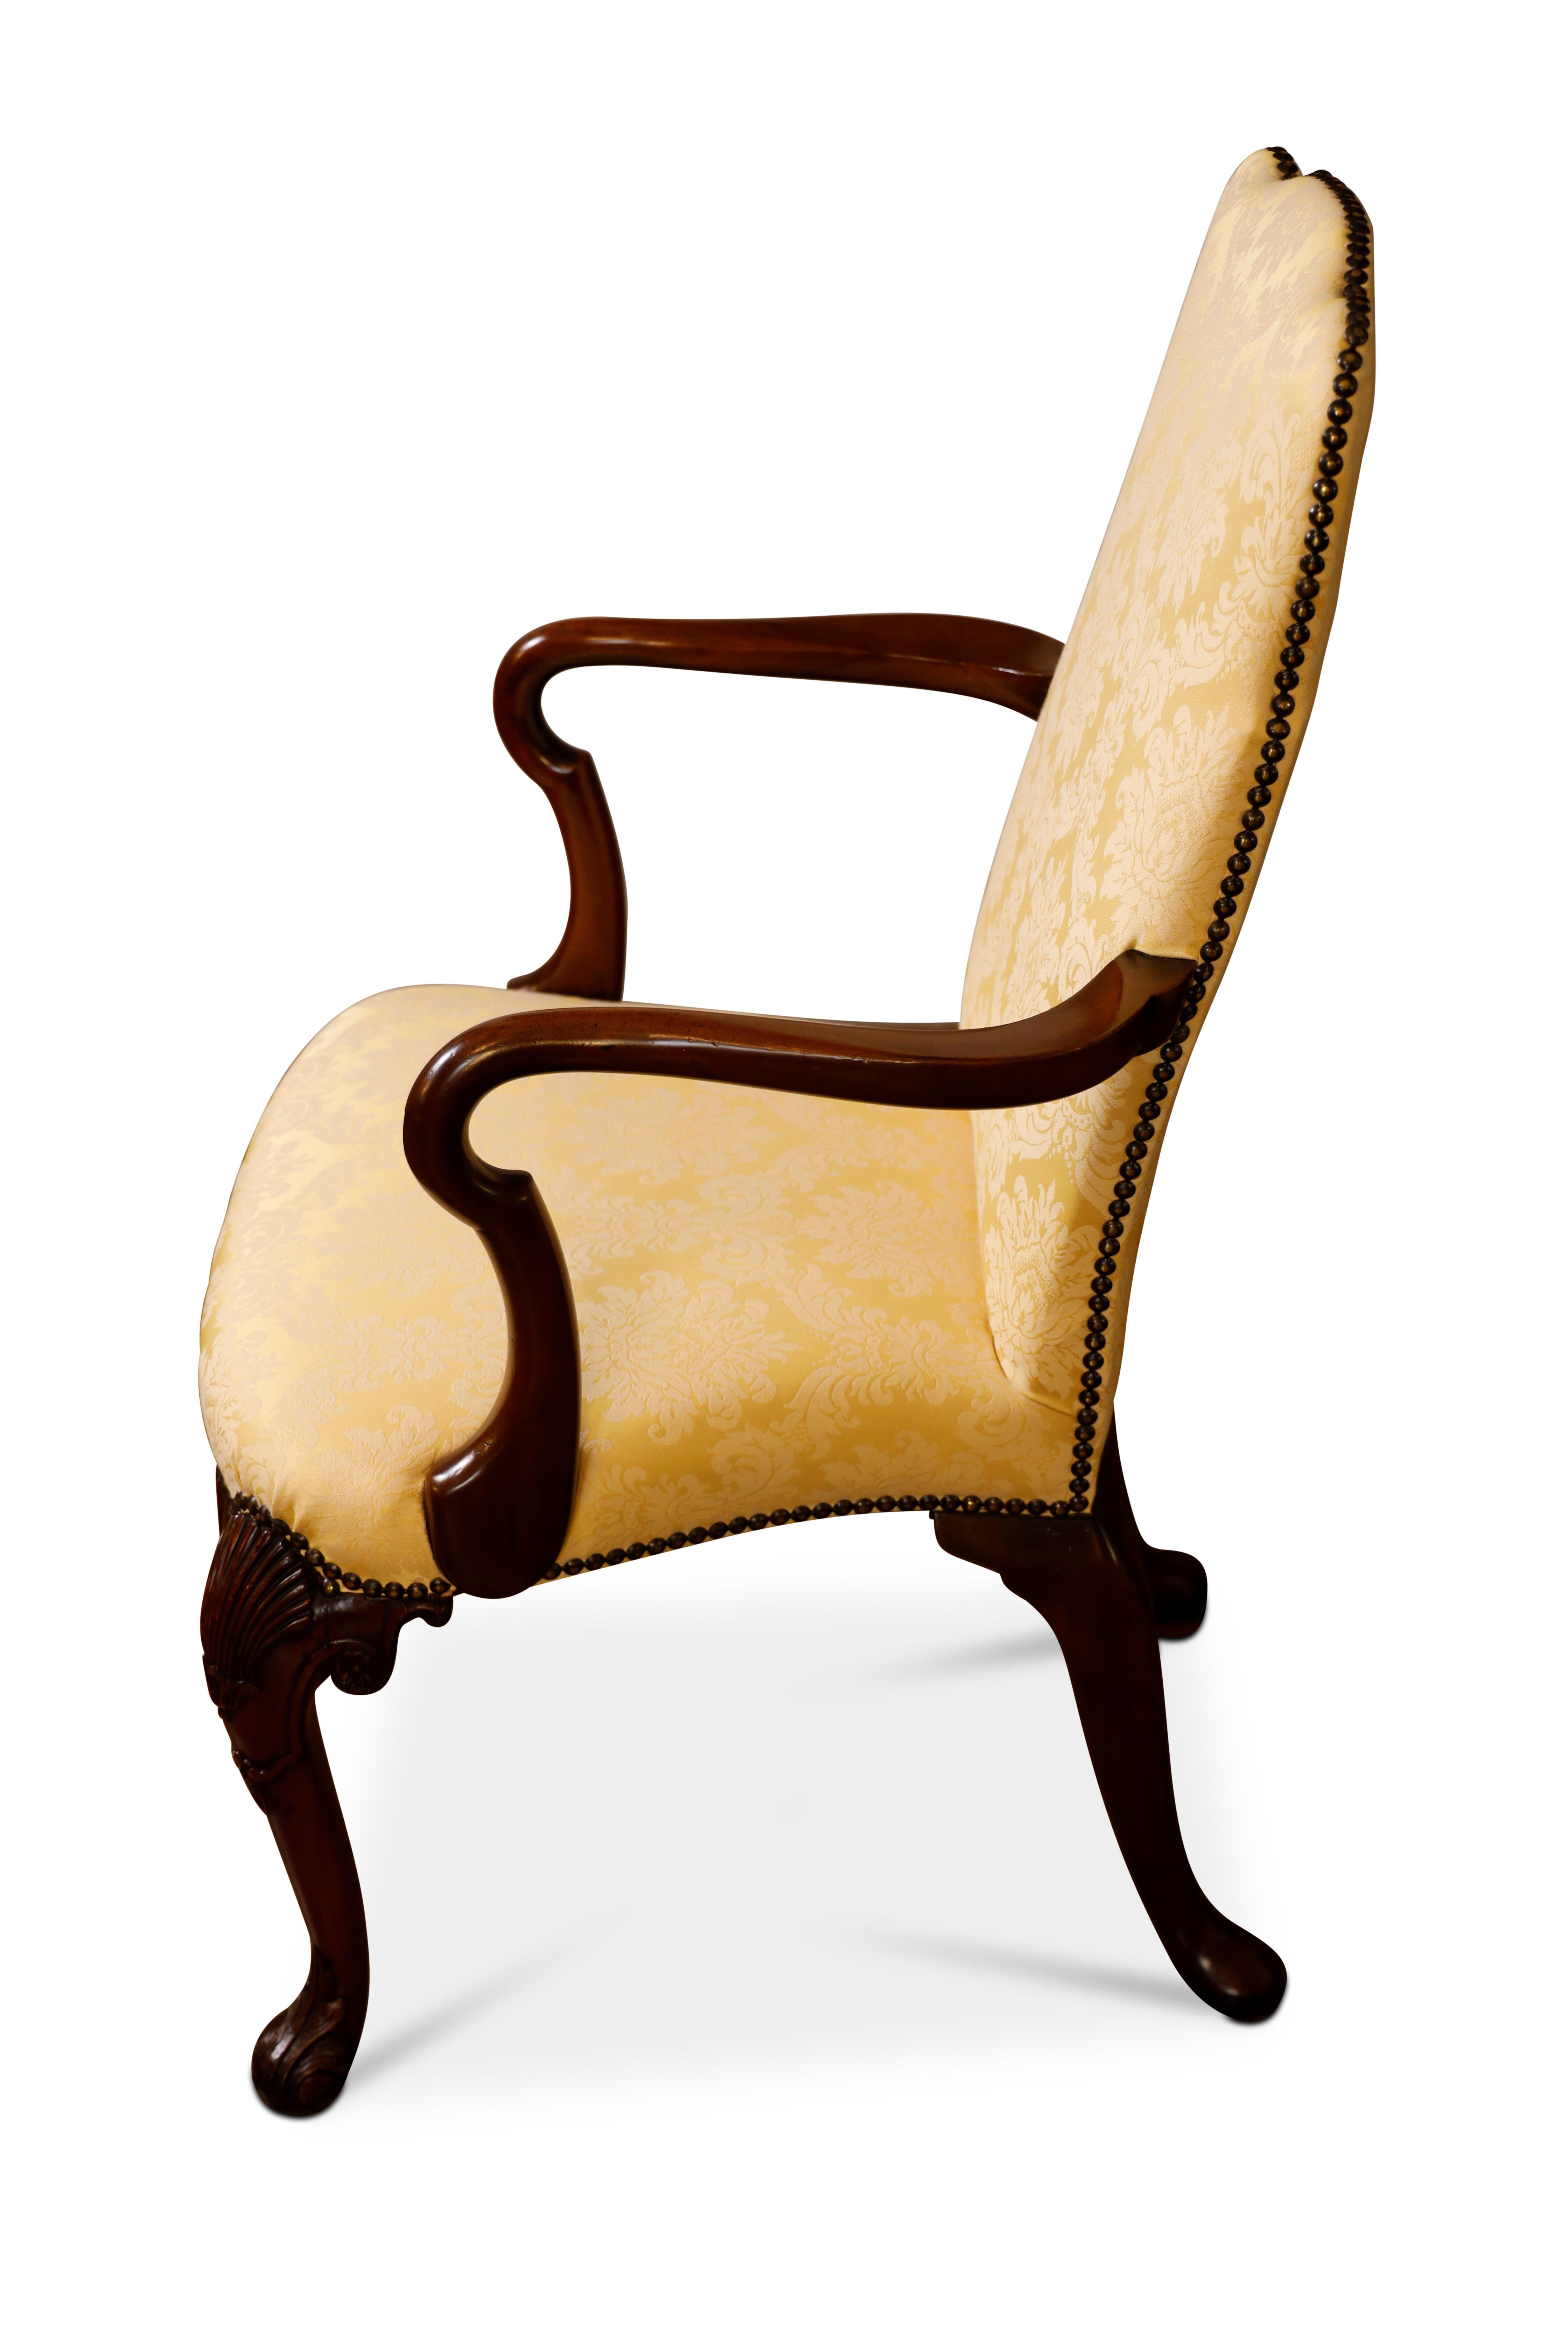 Set of eight Queen Anne style dining chairs, six sides and two arms.  The arm chairs have 